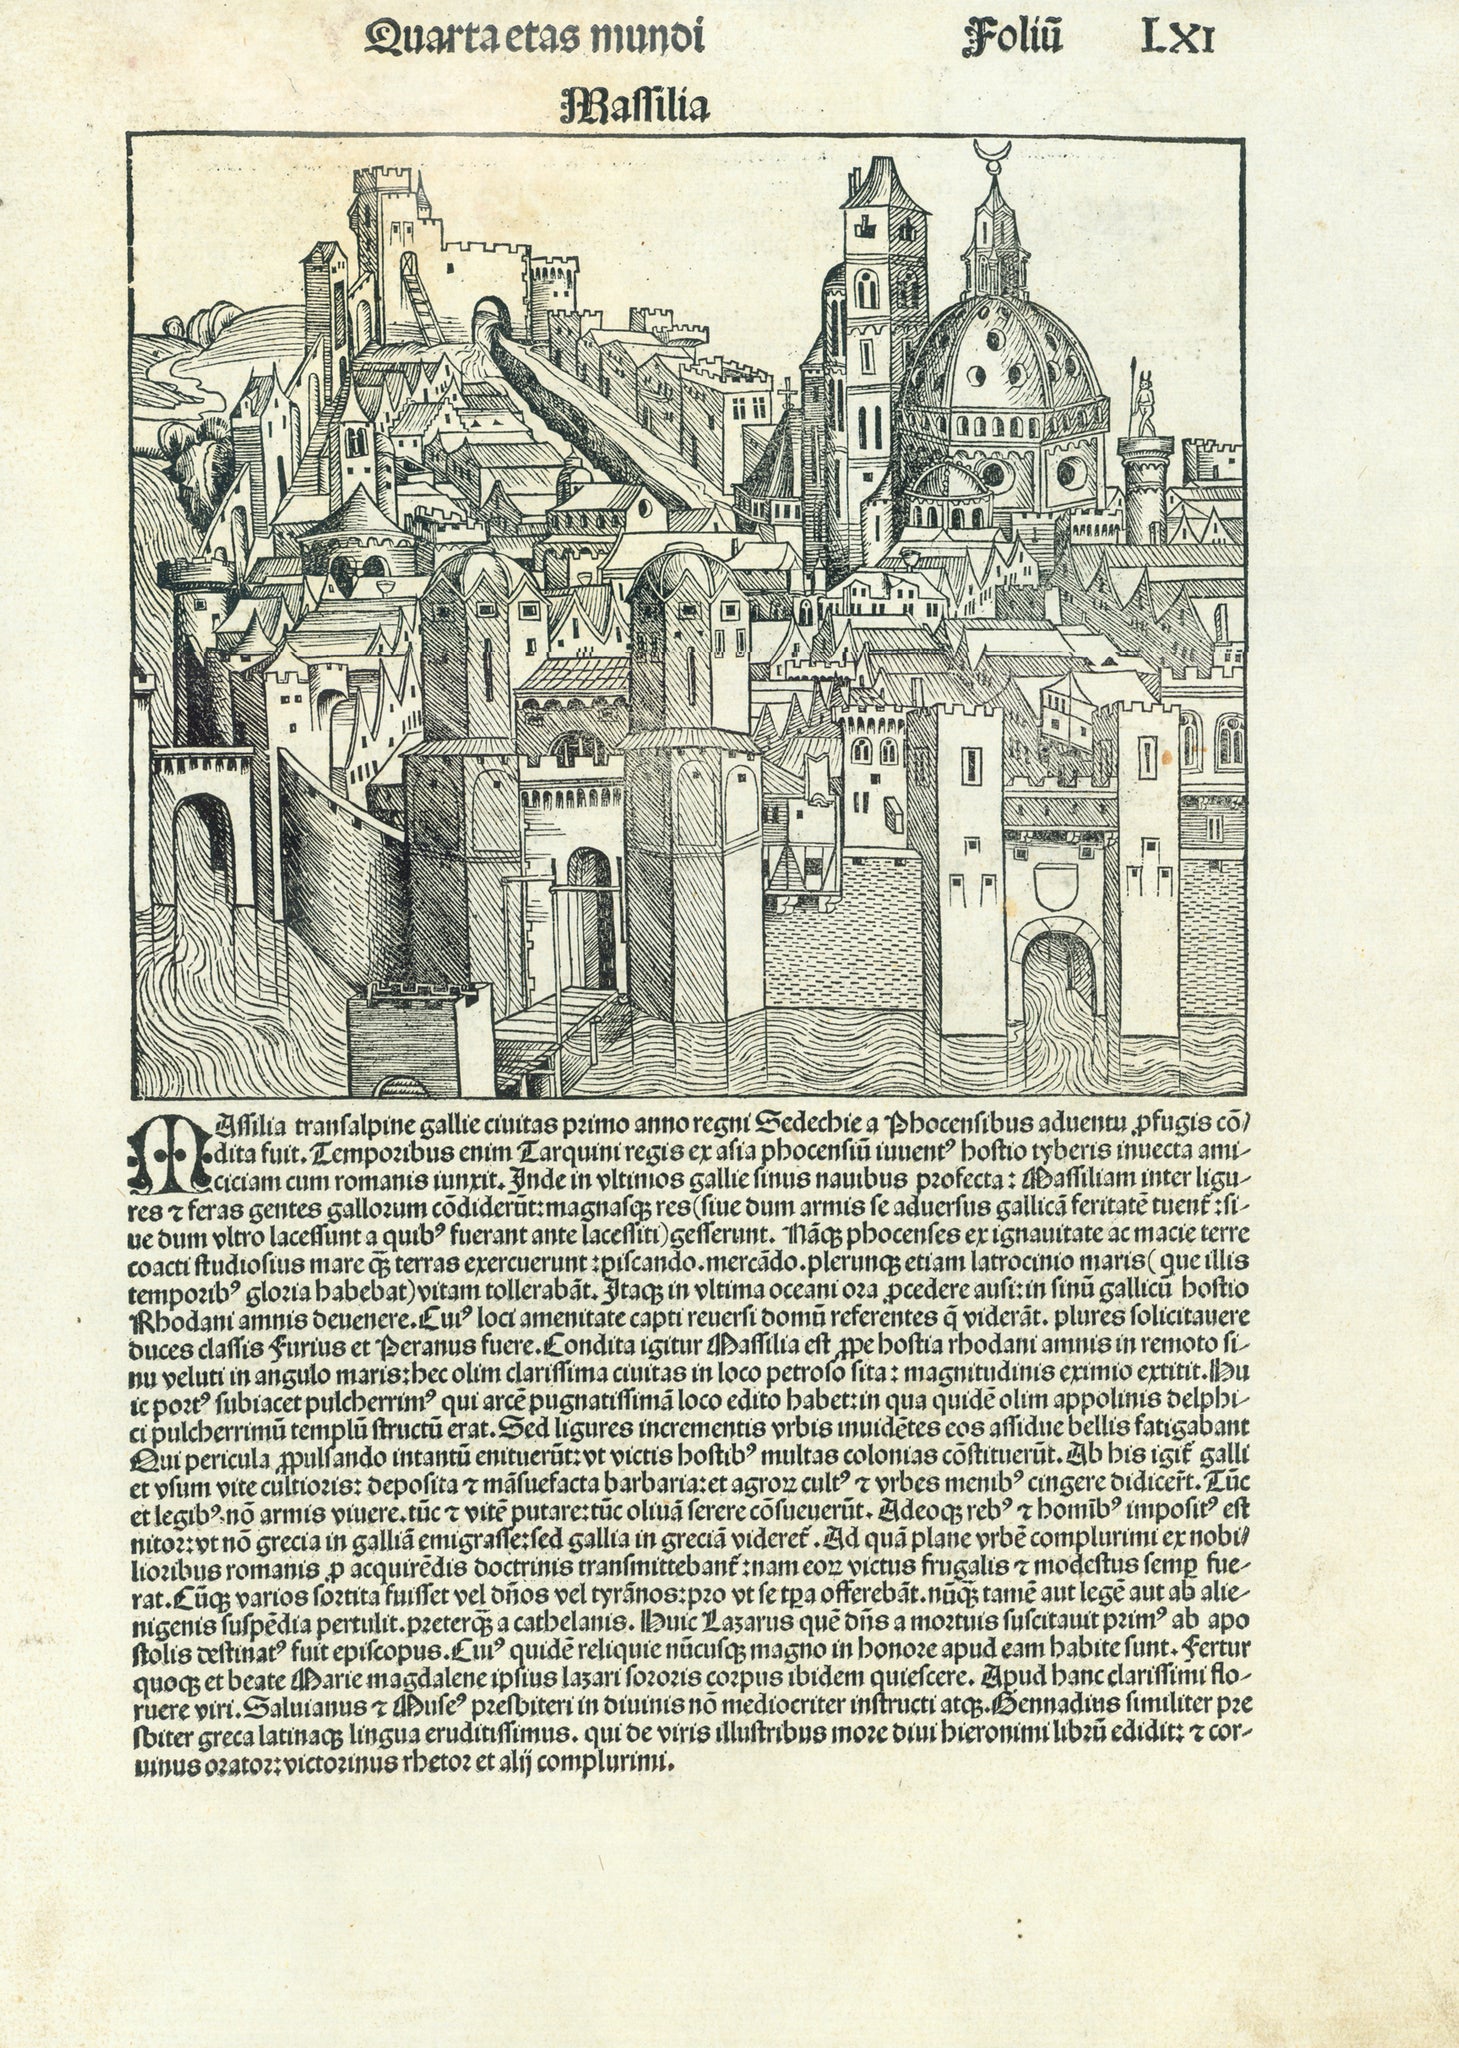 Marseille. - "Massilia"  Earliest print of the city of Marseille  Woodcut. Incunabila  Published in "Nuremberg Chronicle" (Schedelsche Weltchronik or Liber chronicarum)  By Hartmann Schedel (1446-1514)  Published in the Latin (first) edition of this important incunabula work  Nuremberg, 1493  The images on the reverse side are: Pherecides of Syros, Pythagoras, Sappho the Greek poetess, Ezechiel the Prophet, and Daniel the Prophet. Short text about each person.